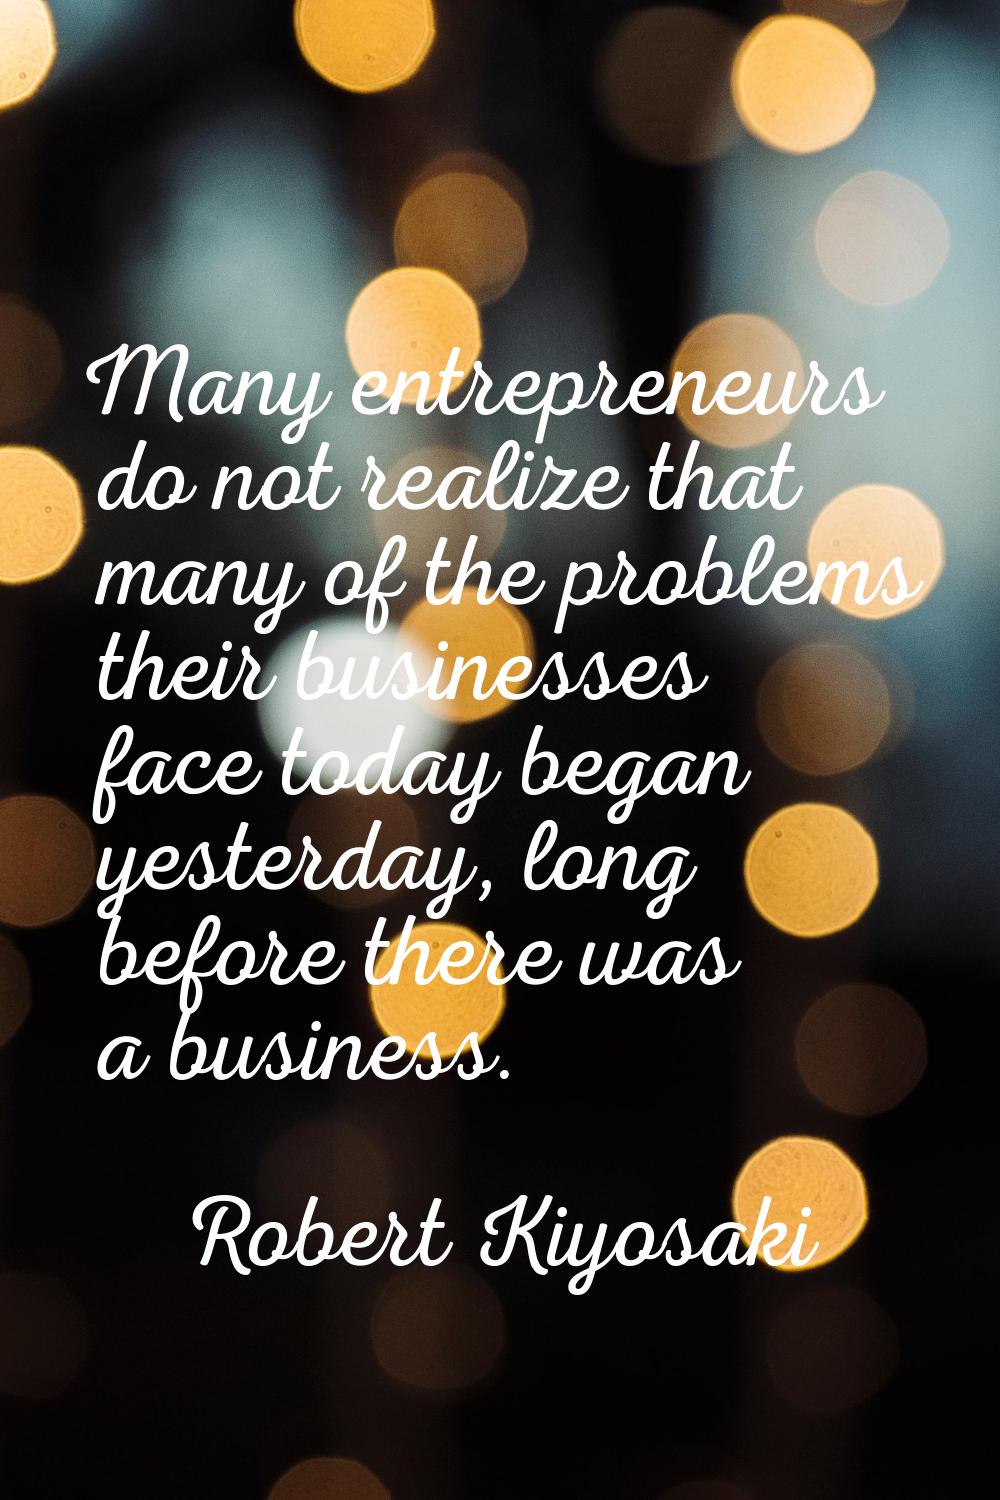 Many entrepreneurs do not realize that many of the problems their businesses face today began yeste